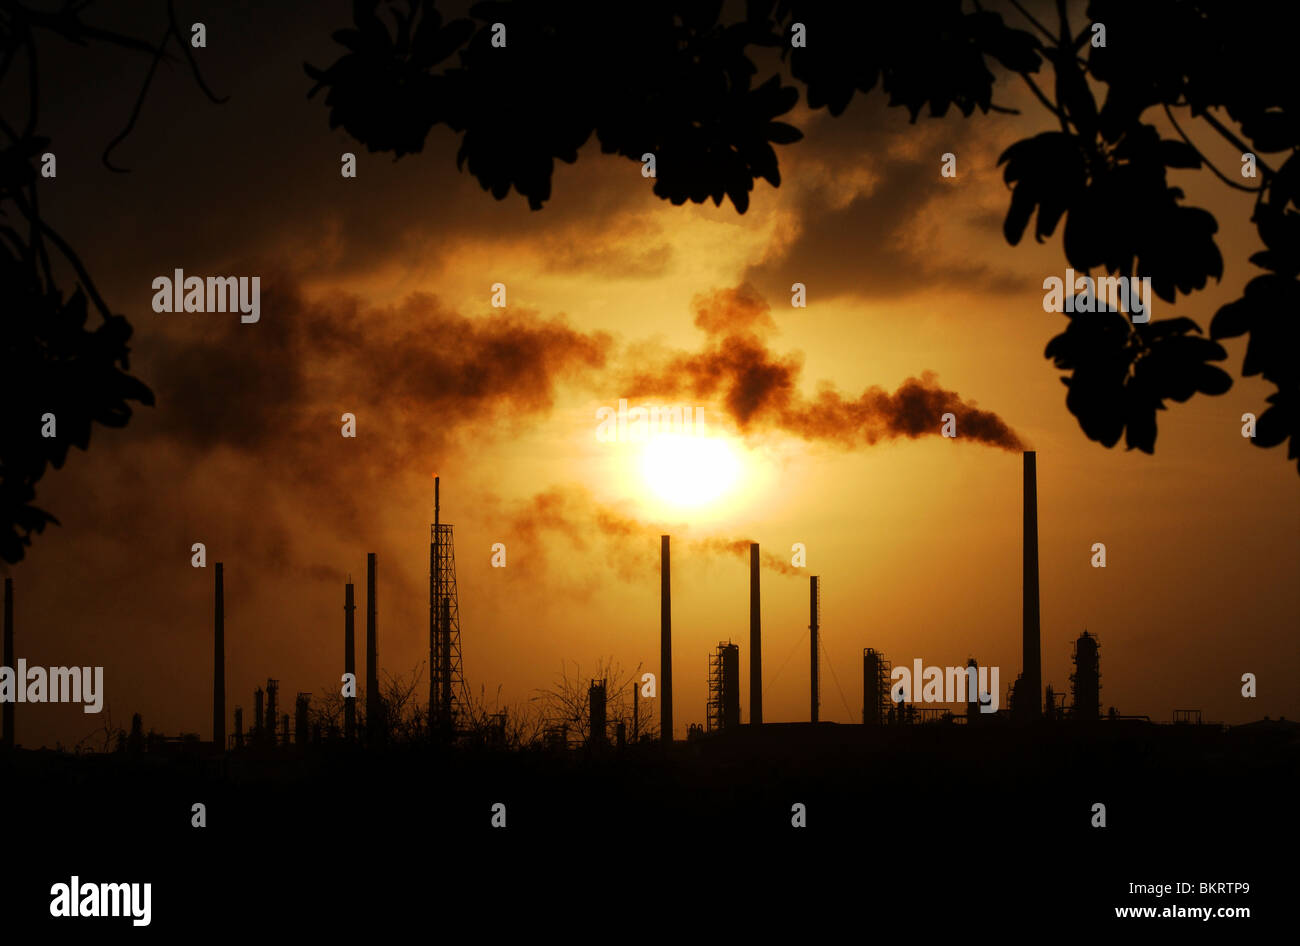 Carribbean, Winward Islands, Lesser Antilles, Dutch Antilles, Curacao, Willemstad, the La Isla oil Refinery at sunset. Stock Photo